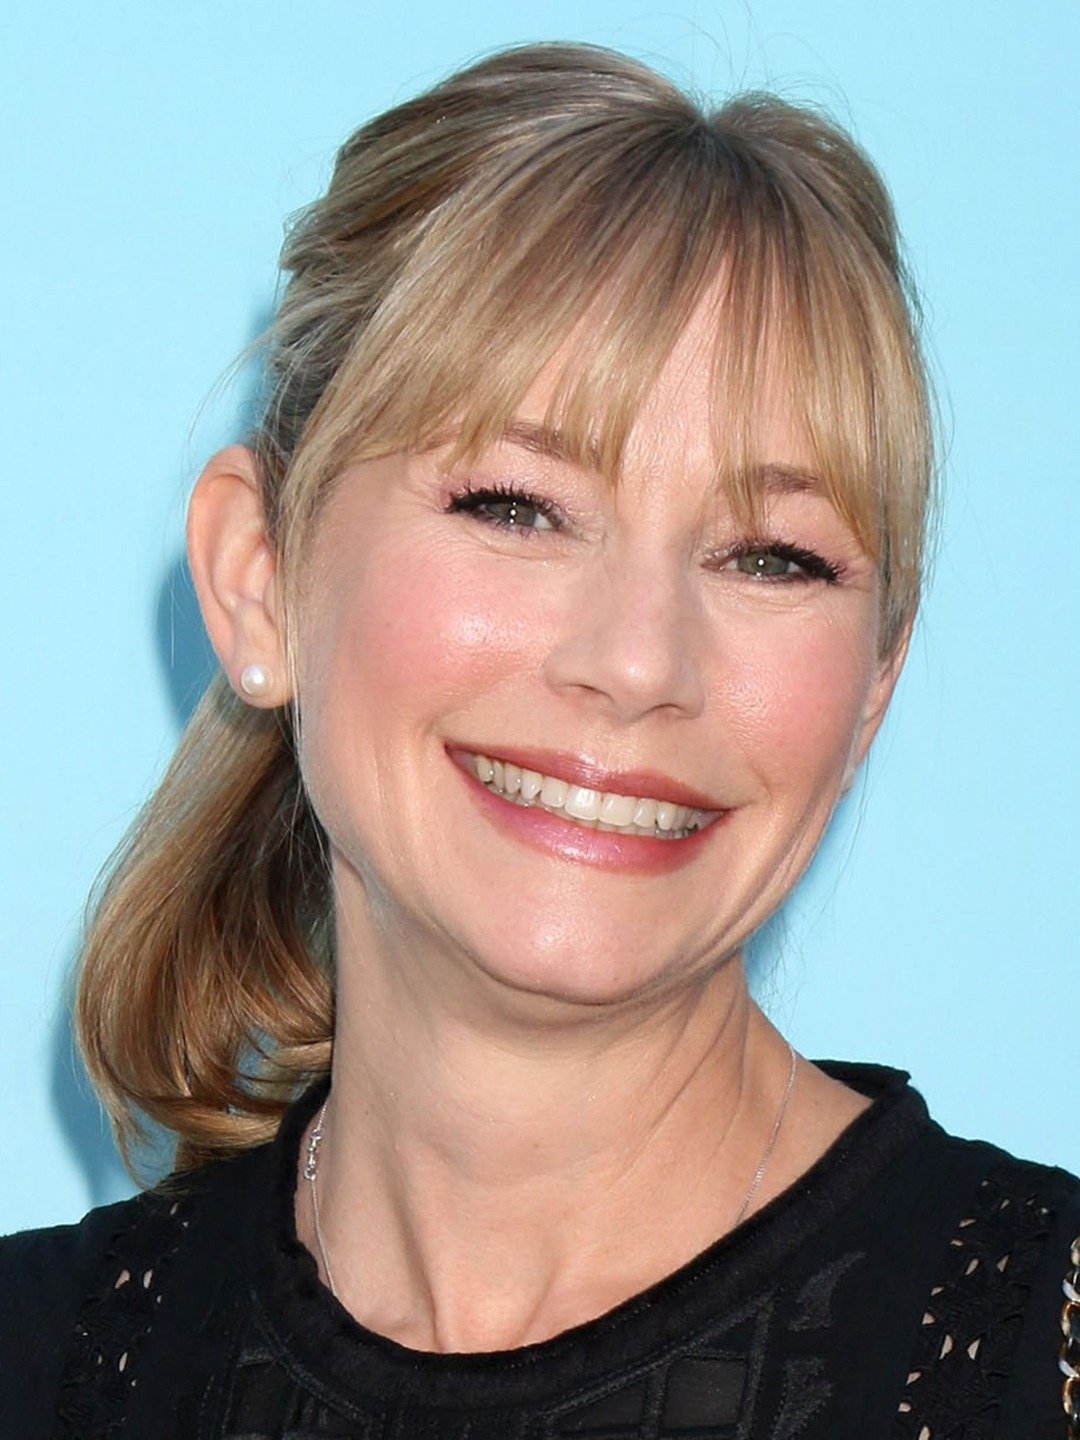 How tall is Meredith Monroe?